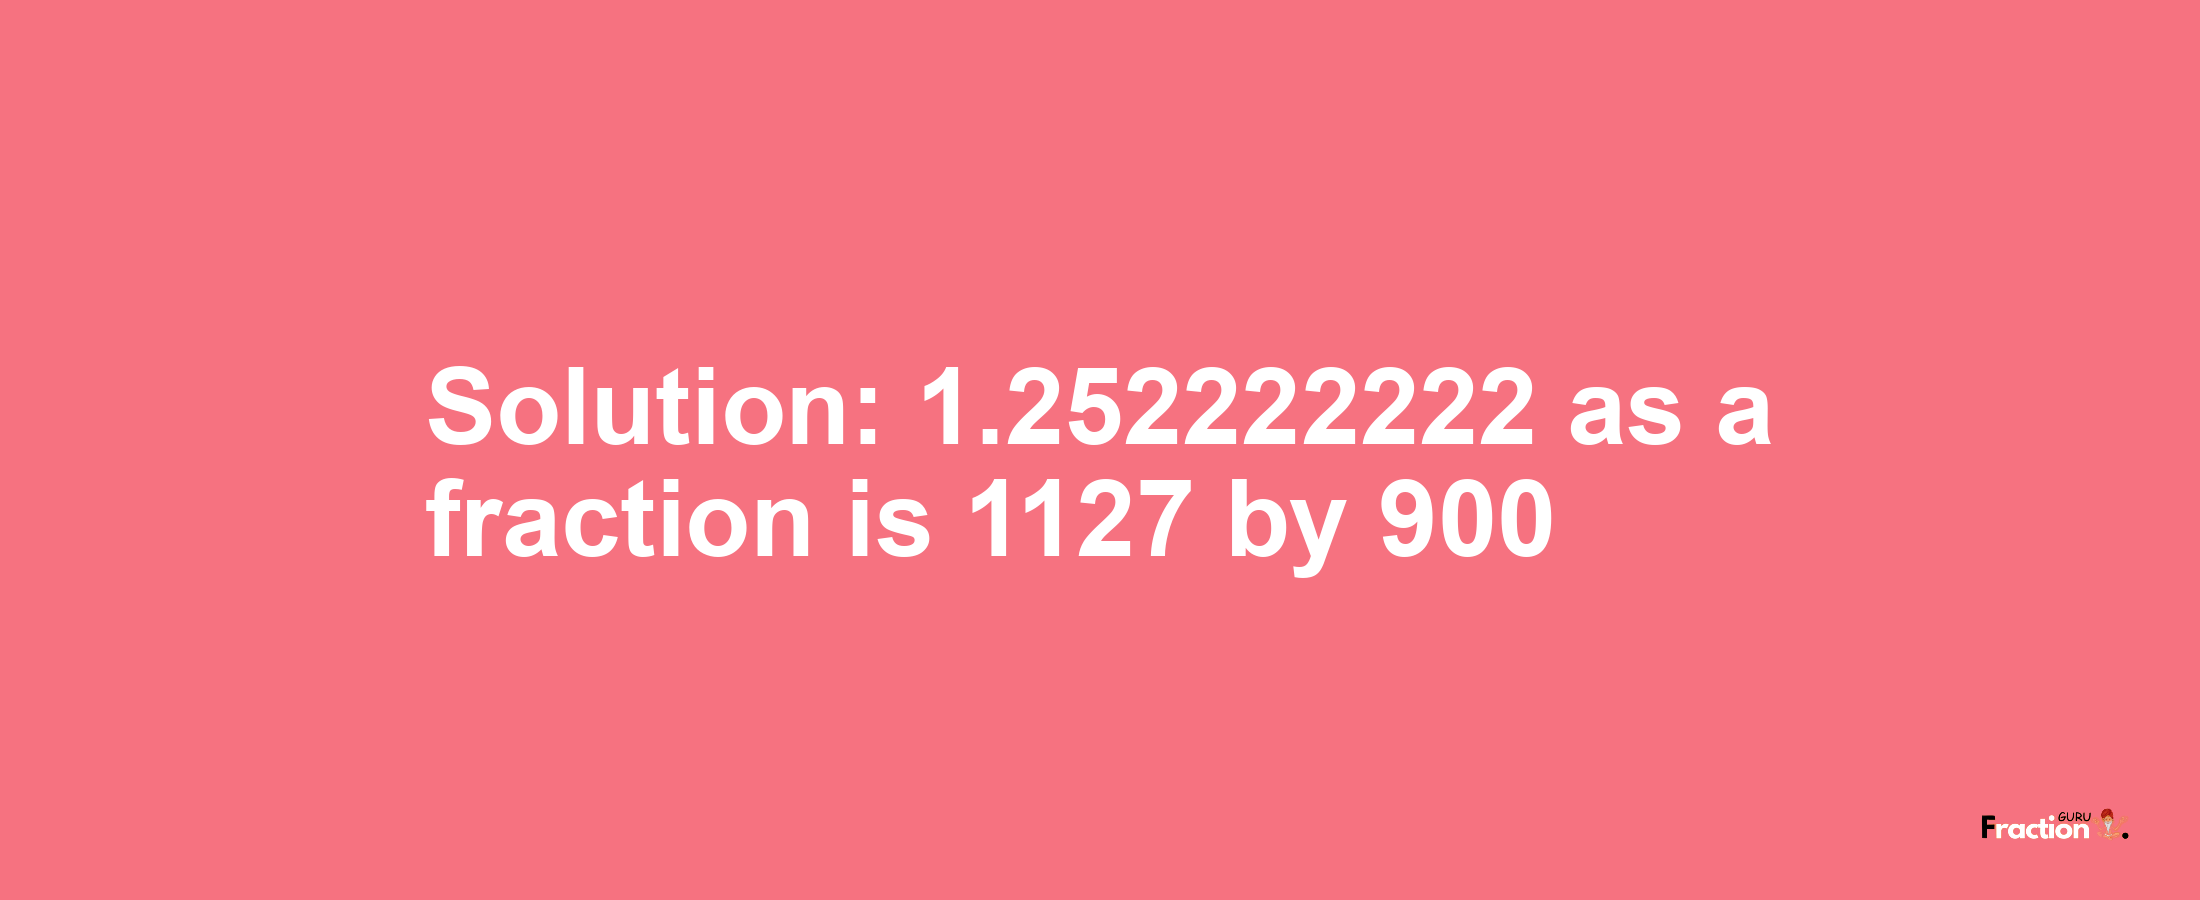 Solution:1.252222222 as a fraction is 1127/900